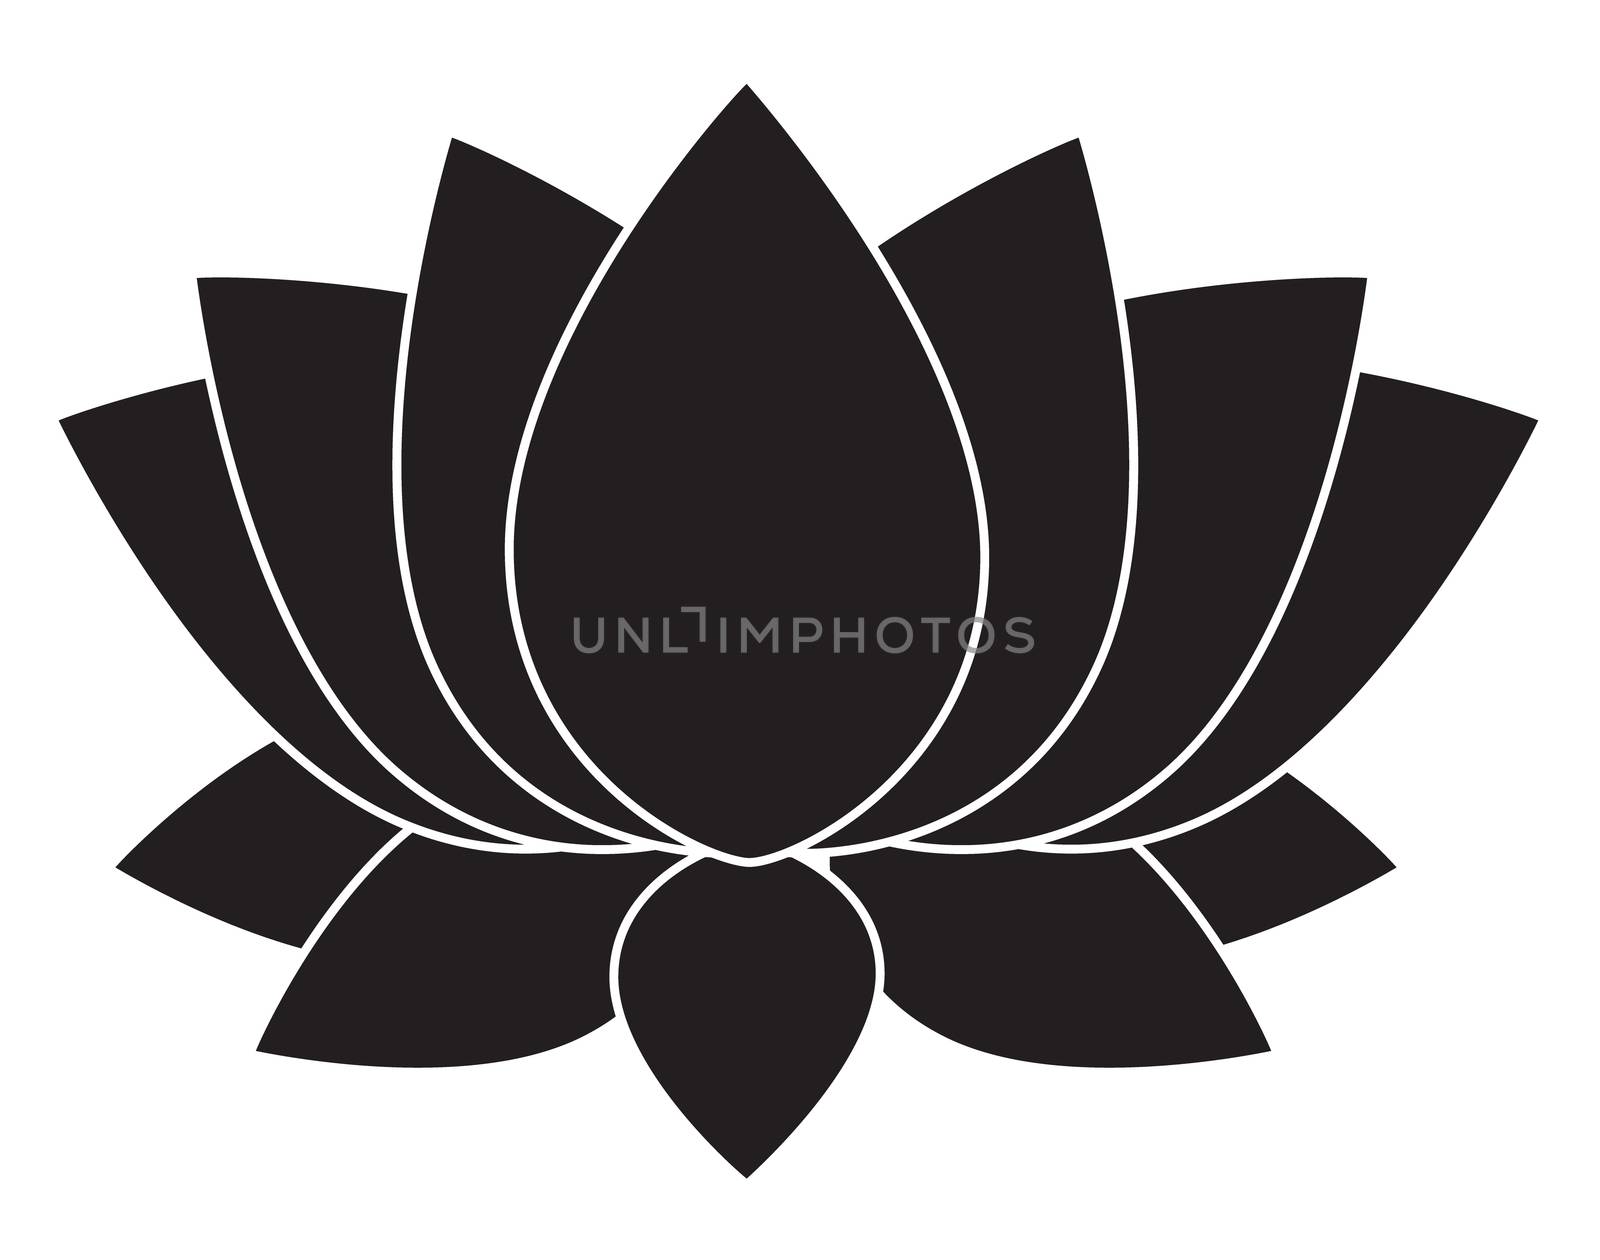 lotus flower blossom icon on white background. flat style design by suthee